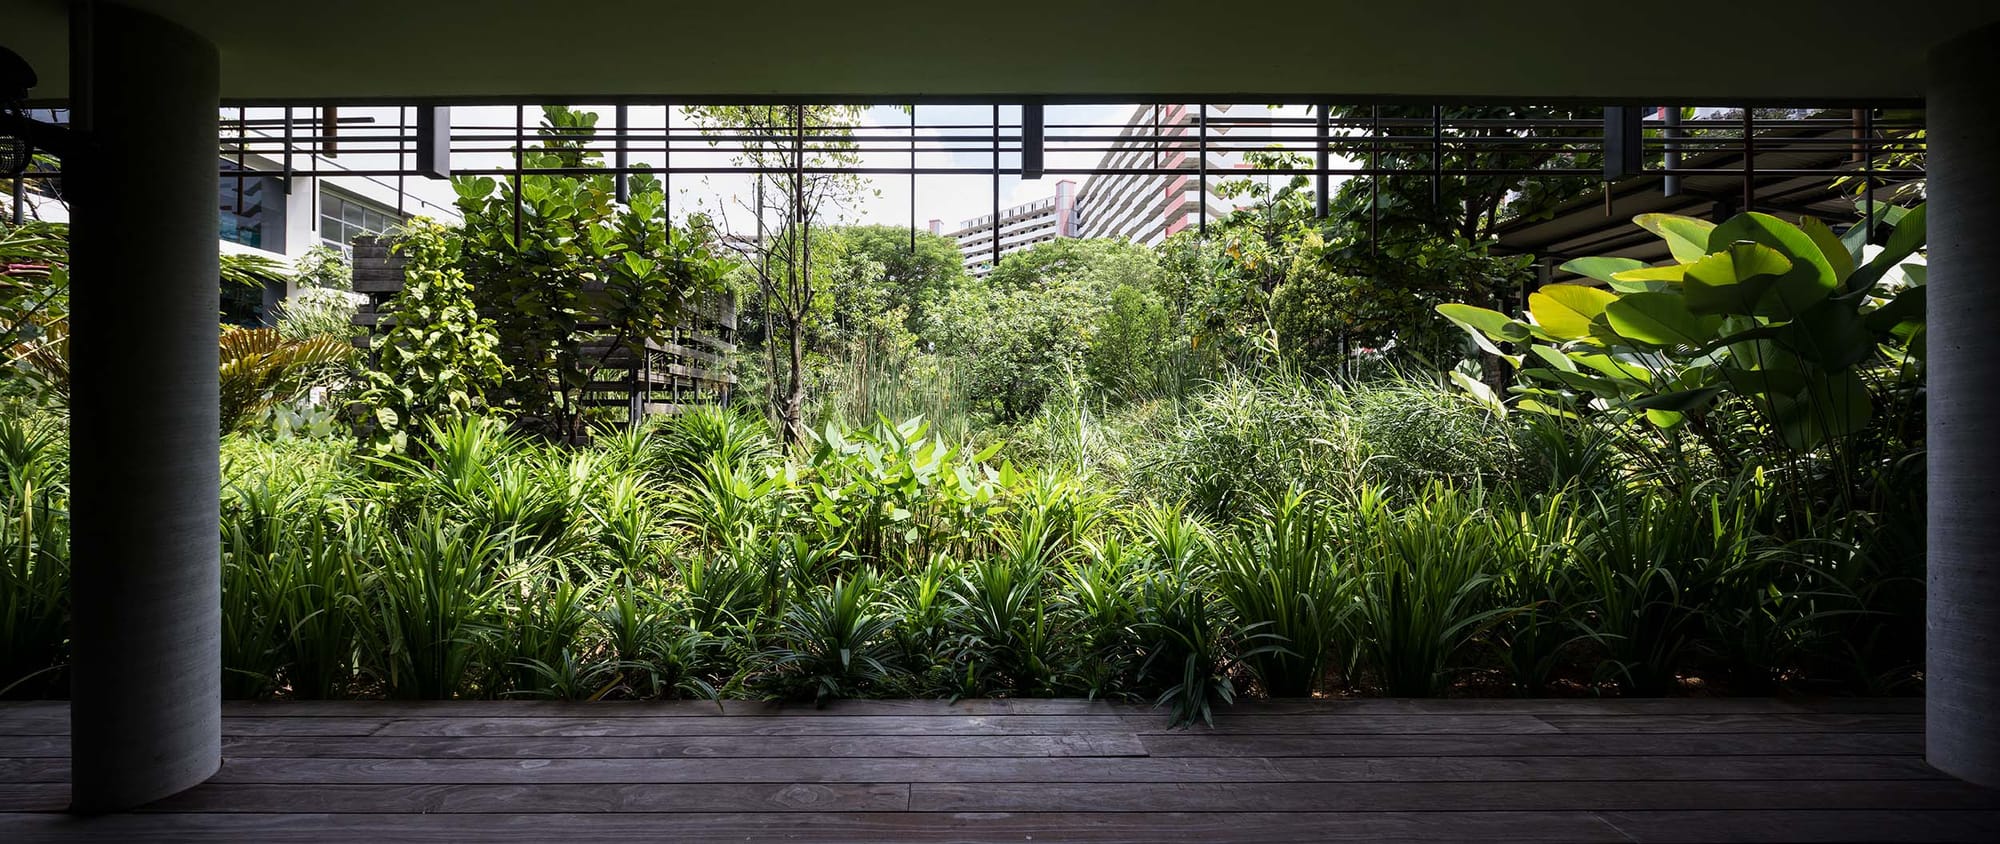 A lush green courtyard garden framed by a wooden walkway, round pillars and a roof